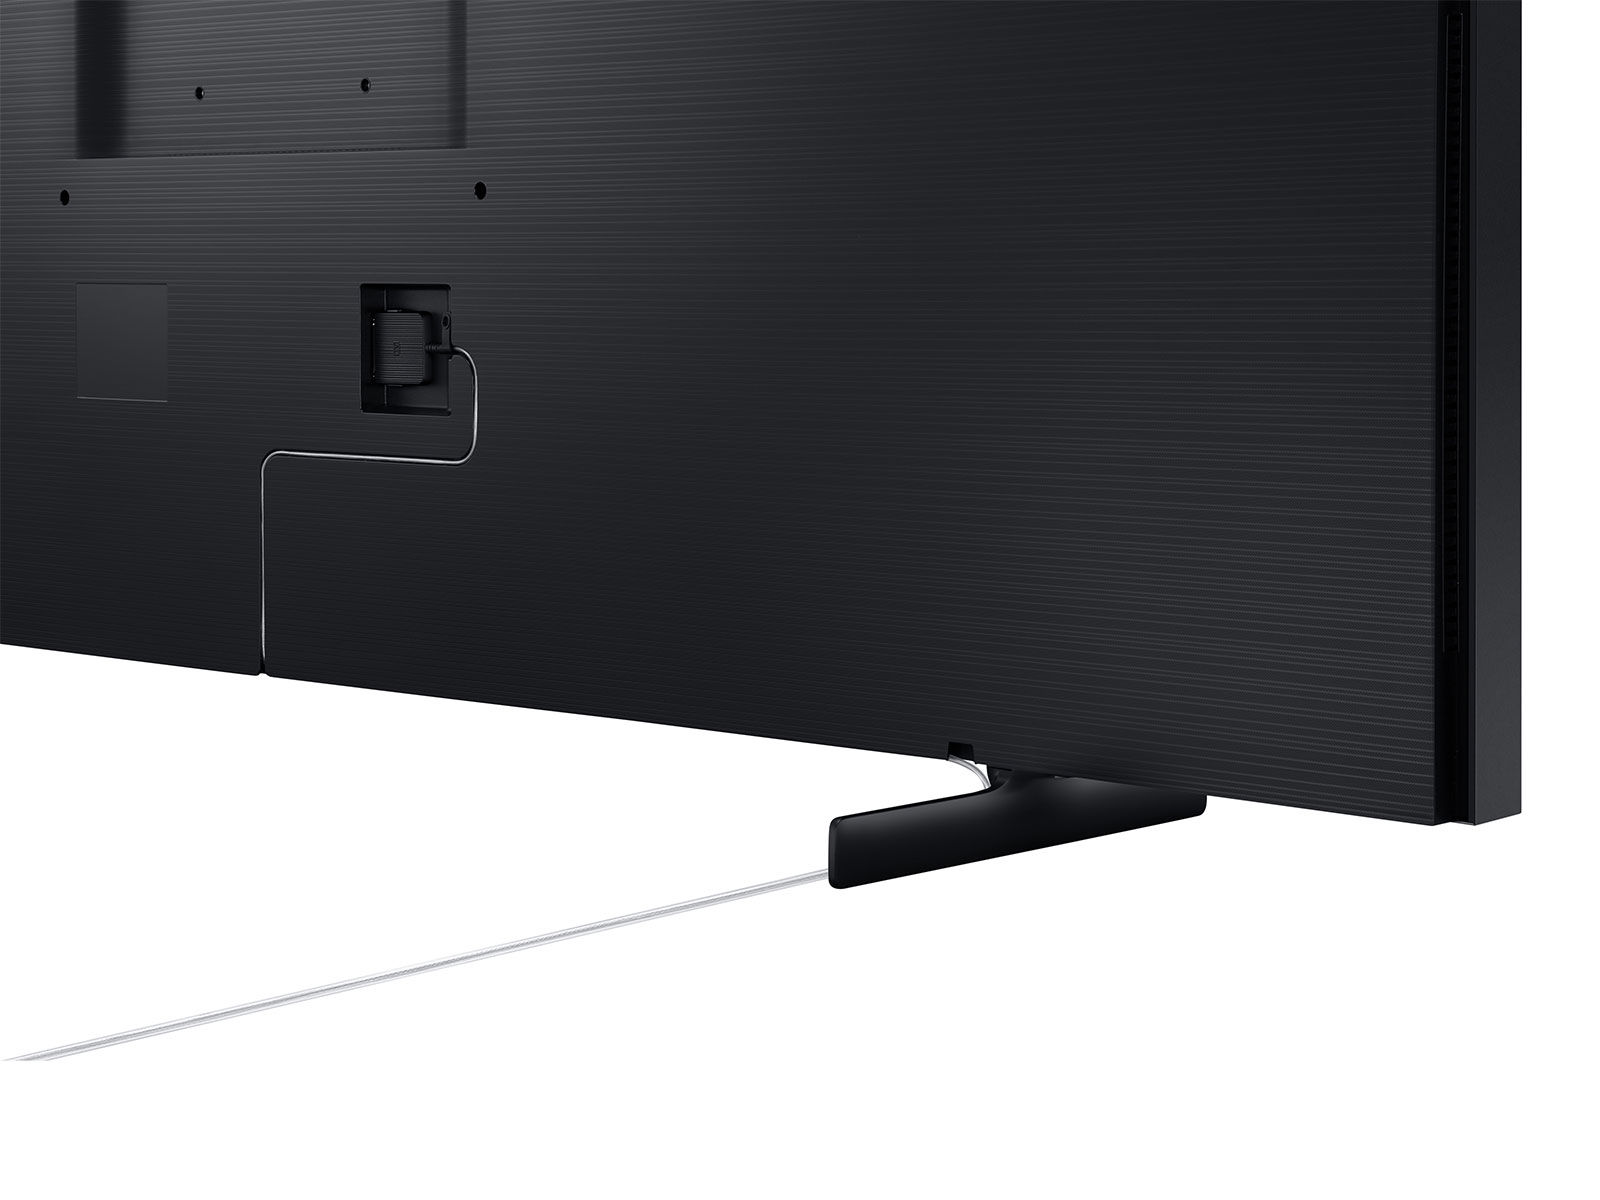 https://image-us.samsung.com/SamsungUS/home/televisions-and-home-theater/tvs/frame-tv/pdp/020620/gallery/05-PDP-GALLERY-Frame-product-QN75LS03TAFXZA-Detail-black-1600x1200.jpg?$product-details-jpg$